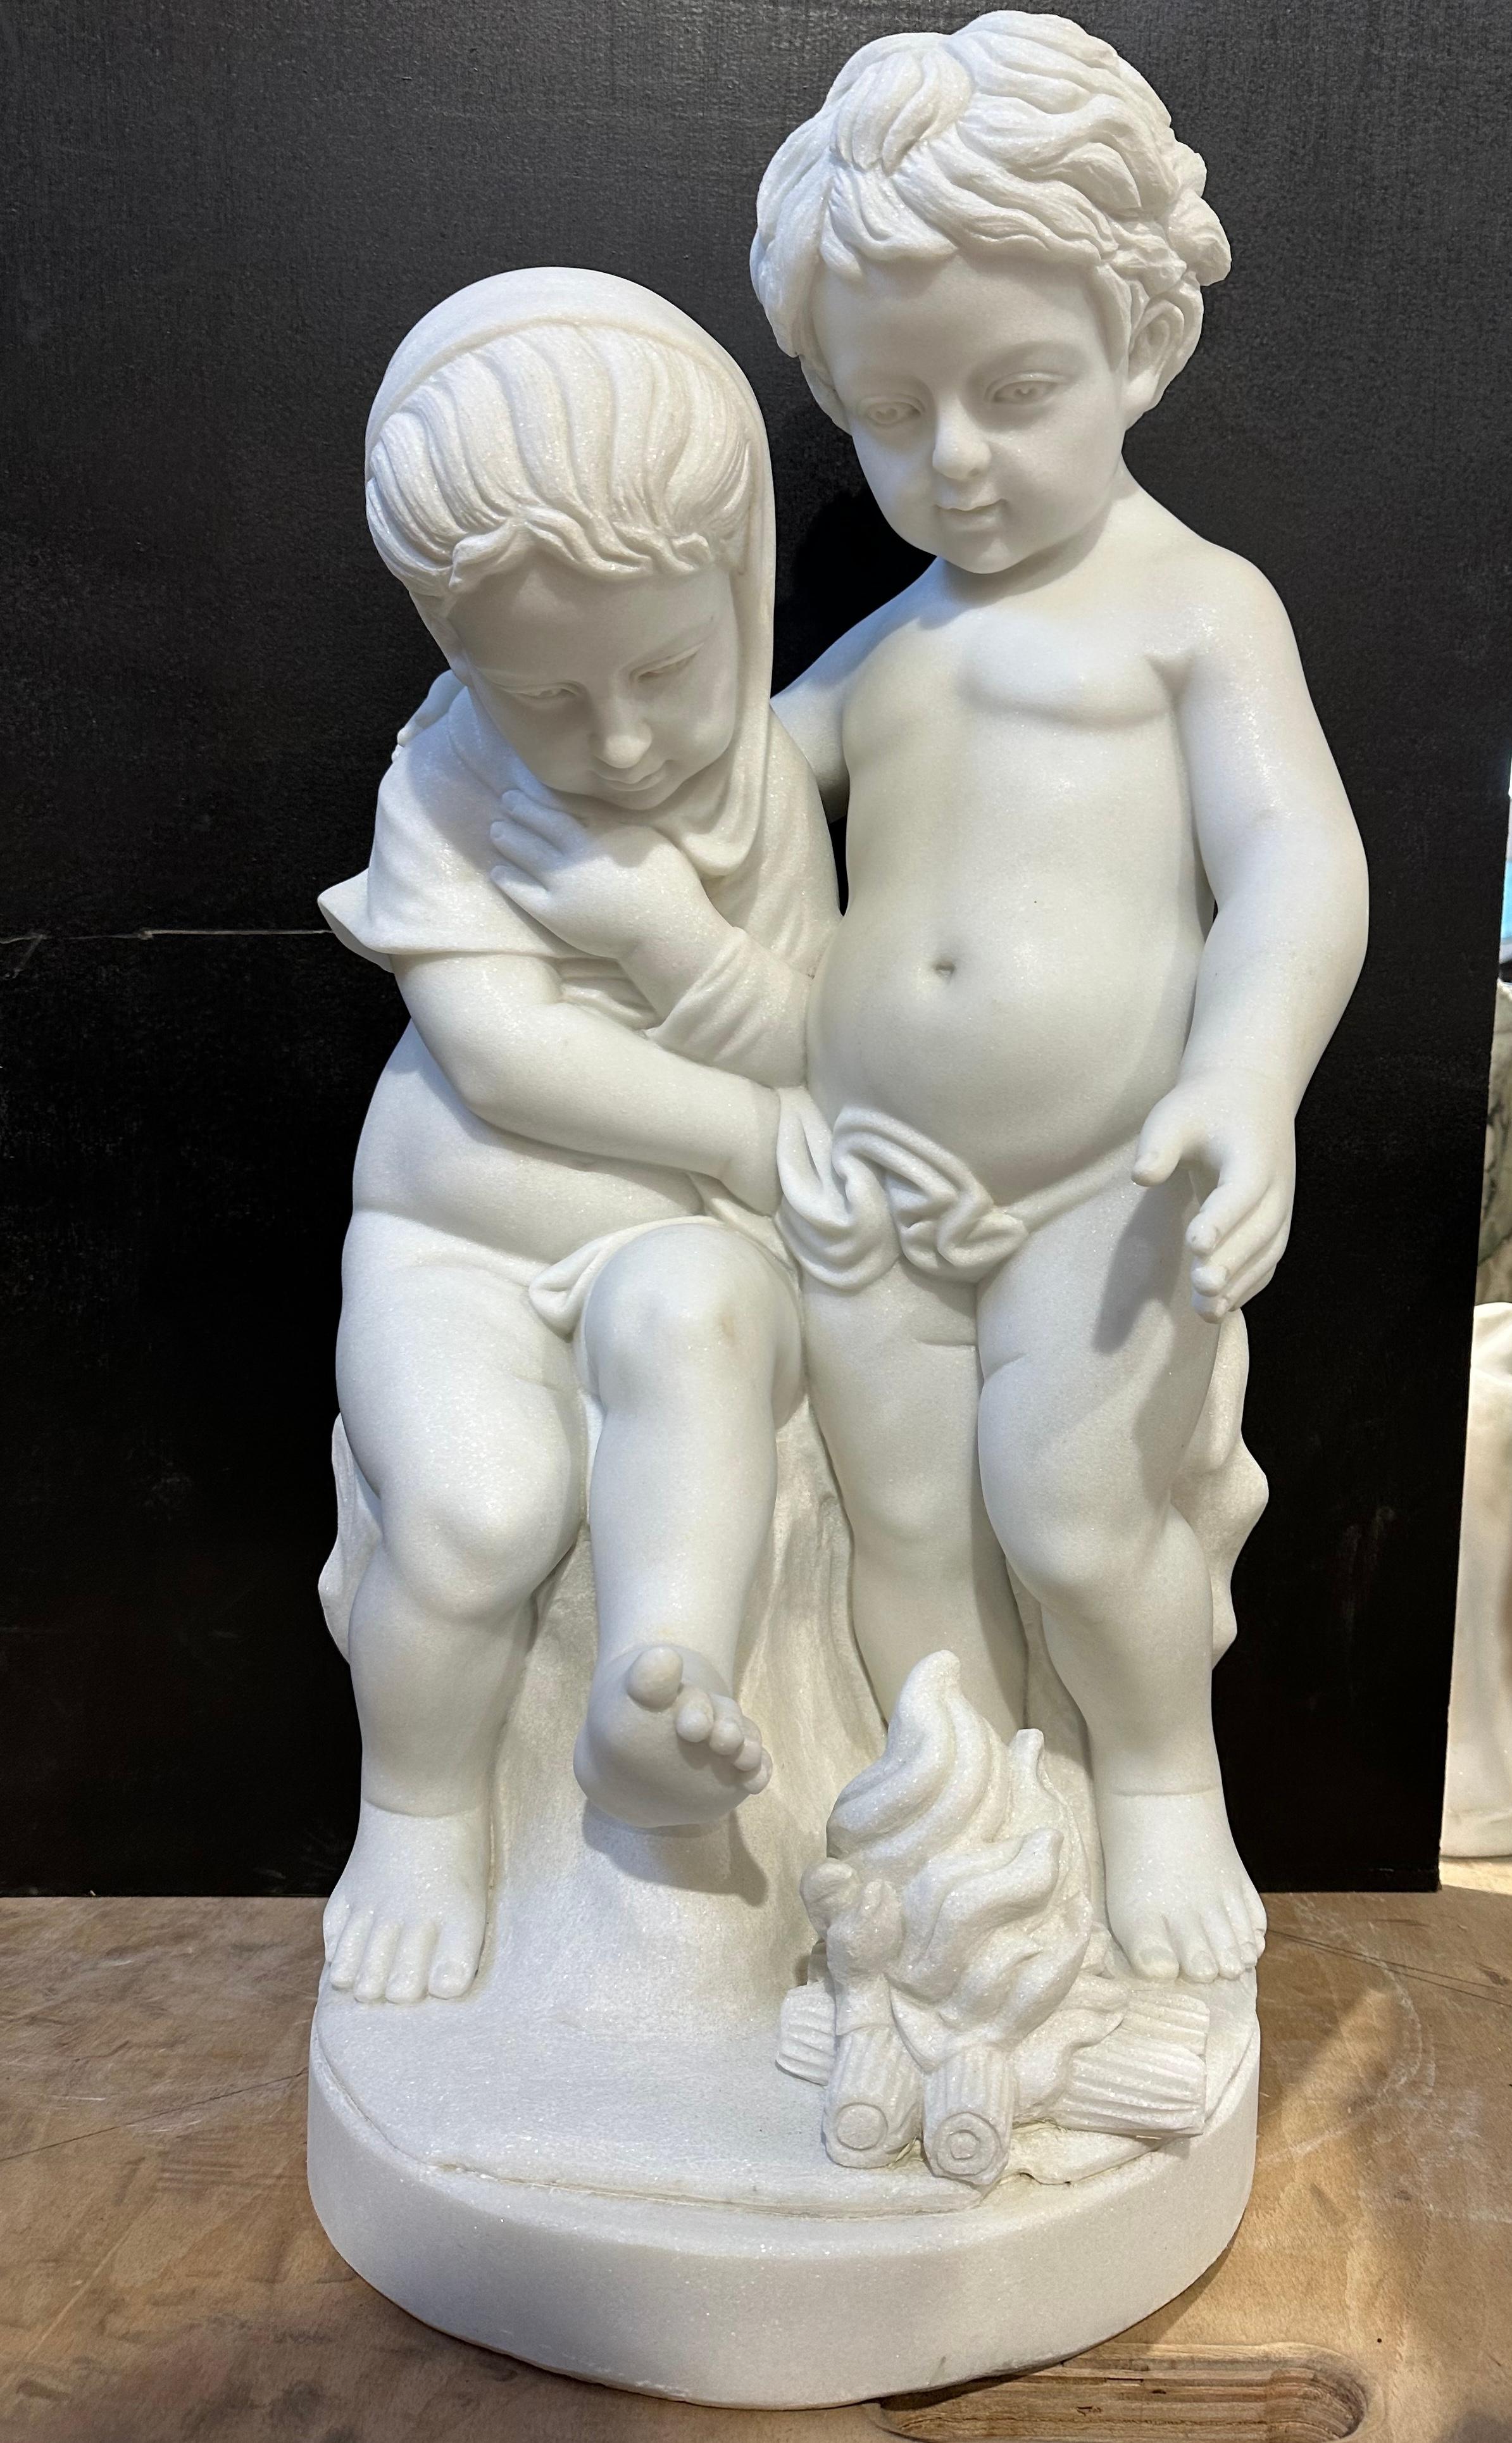 A charming white marble sculpture of two childlike putti, warming their toes on a delicately carved wood fire. 
The carving is skillful and detailed from the ruffled hair of the putti to their rounded, smooth figures and wiggling toes. 
A lovely